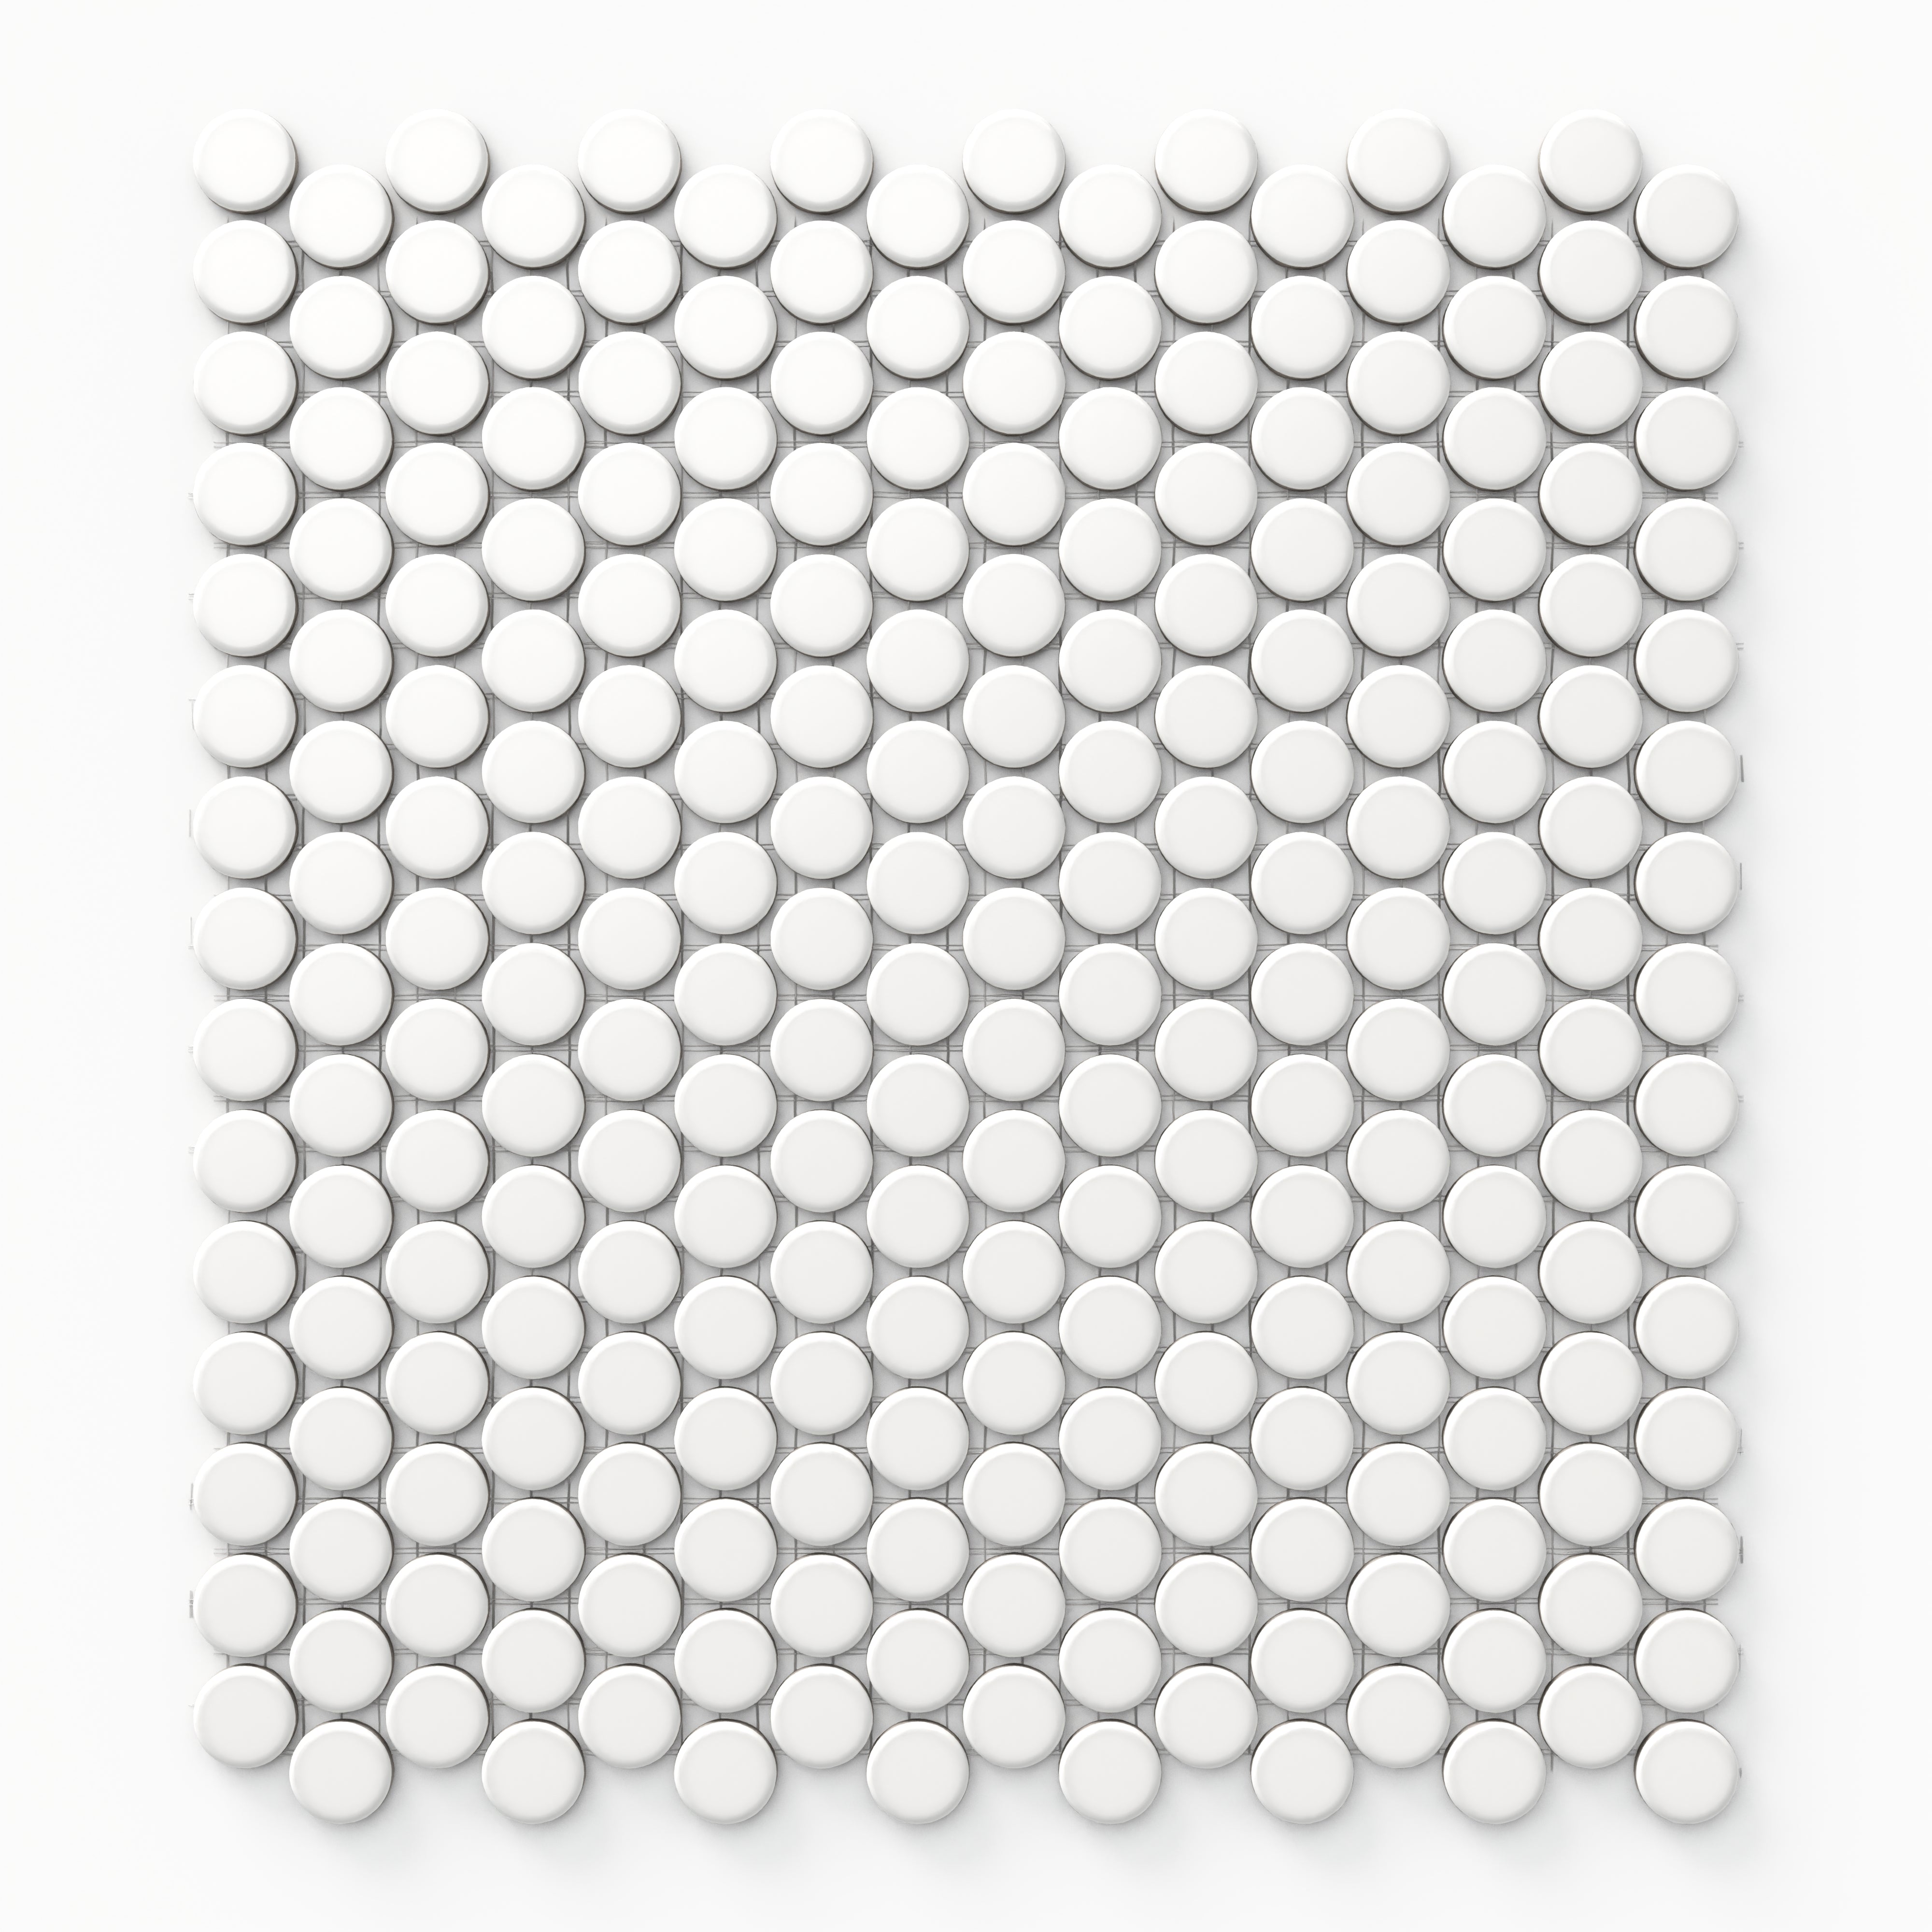 Ollie 3/4x3/4 Matte Porcelain Mosaic Penny Round Tile in White